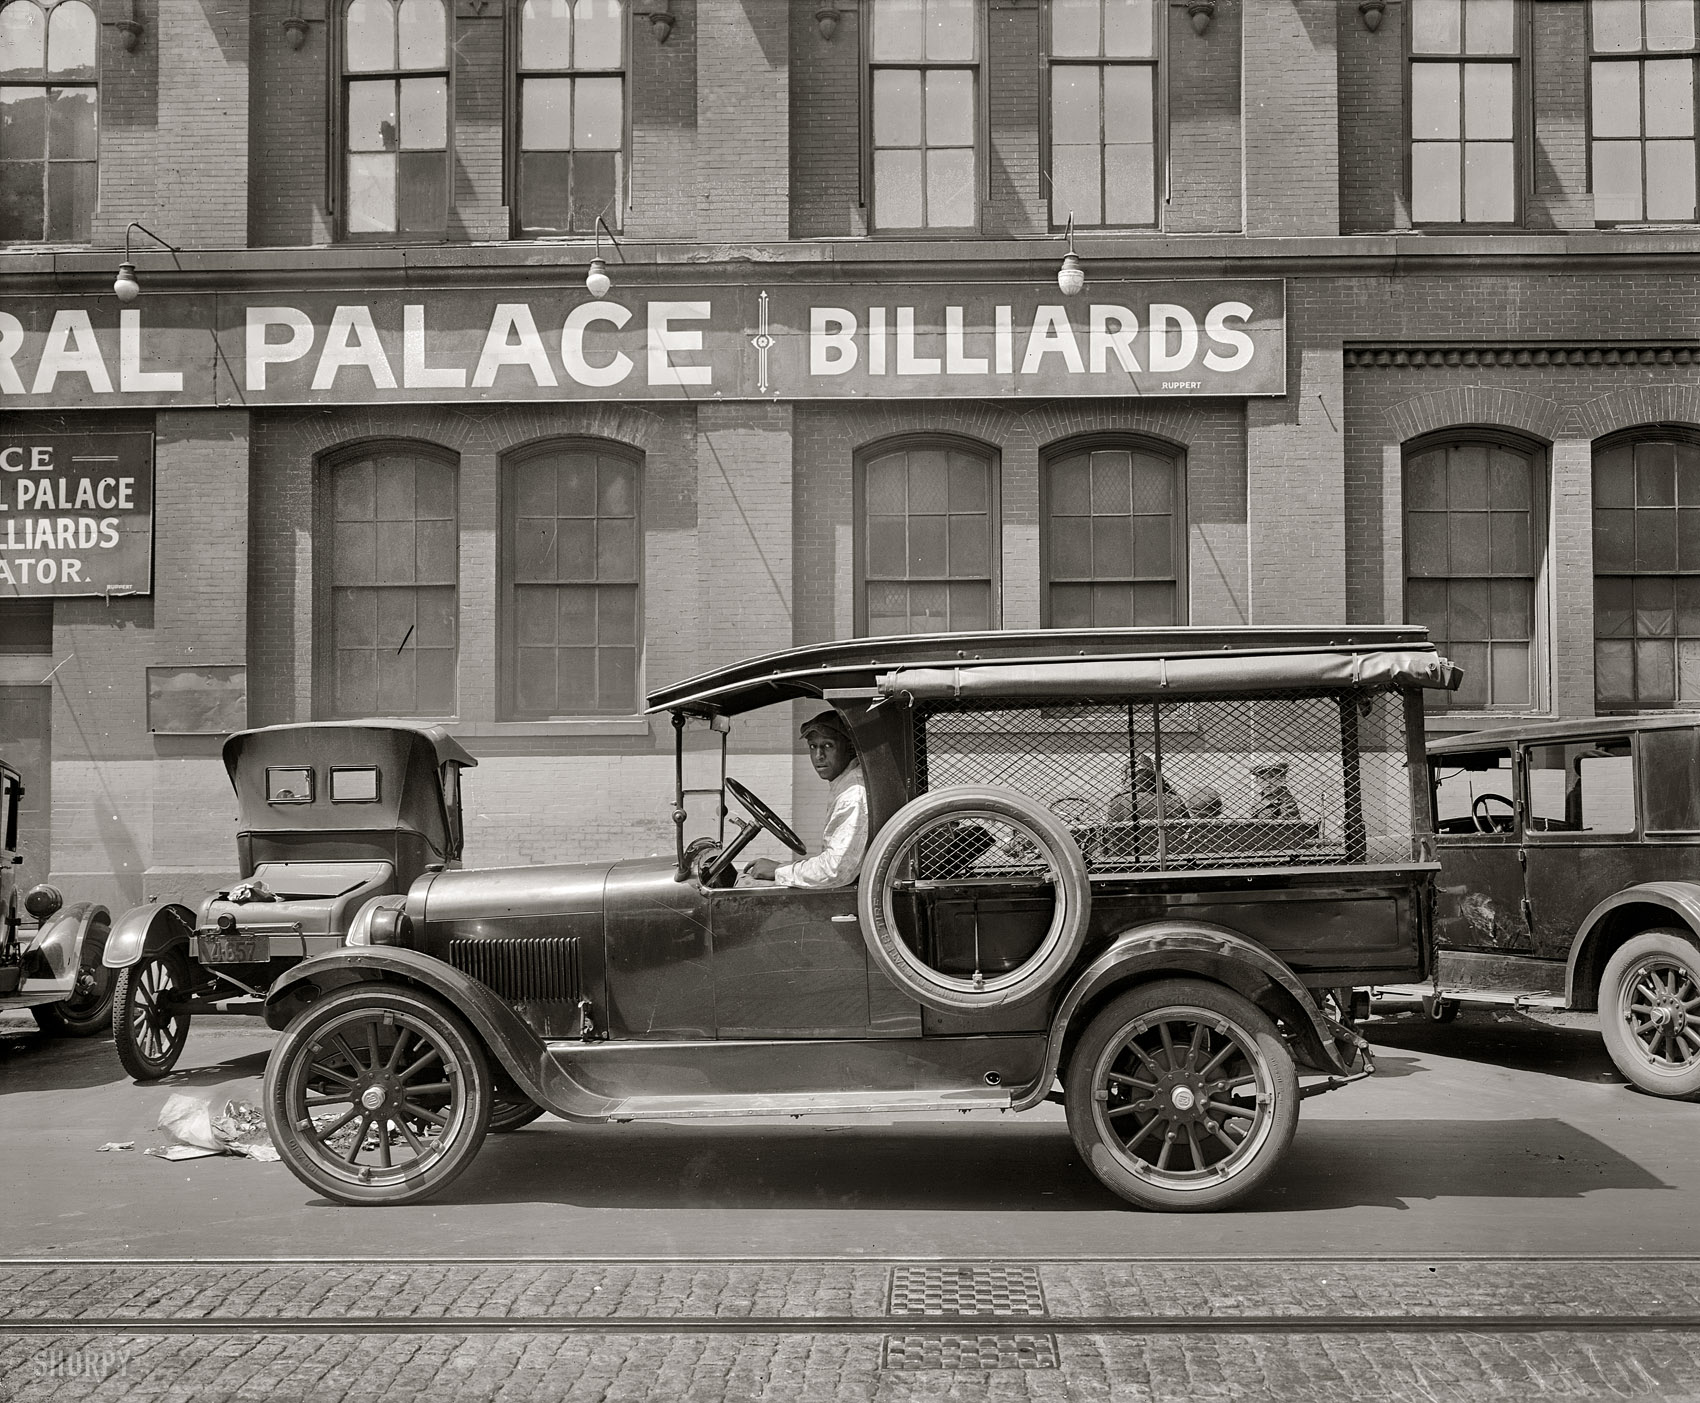 "Semmes Motor Co. truck, 1926." A Dodge truck outside the Grand Central Palace pool hall in Washington, Pennsylvania Avenue and Seventh Street N.W. National Photo Company Collection glass negative. View full size.